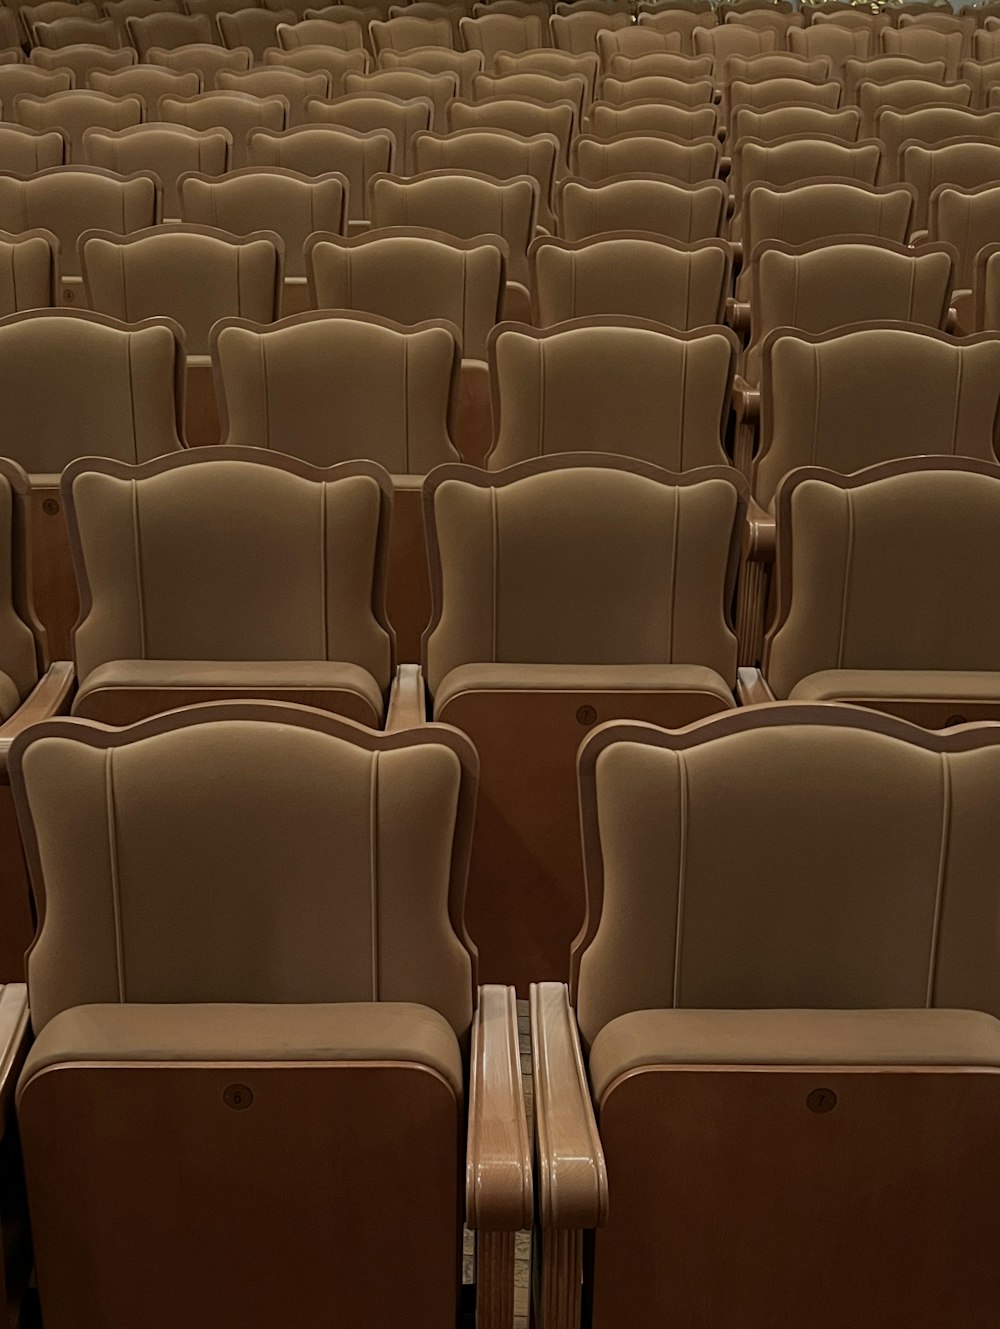 rows of empty seats in a large auditorium